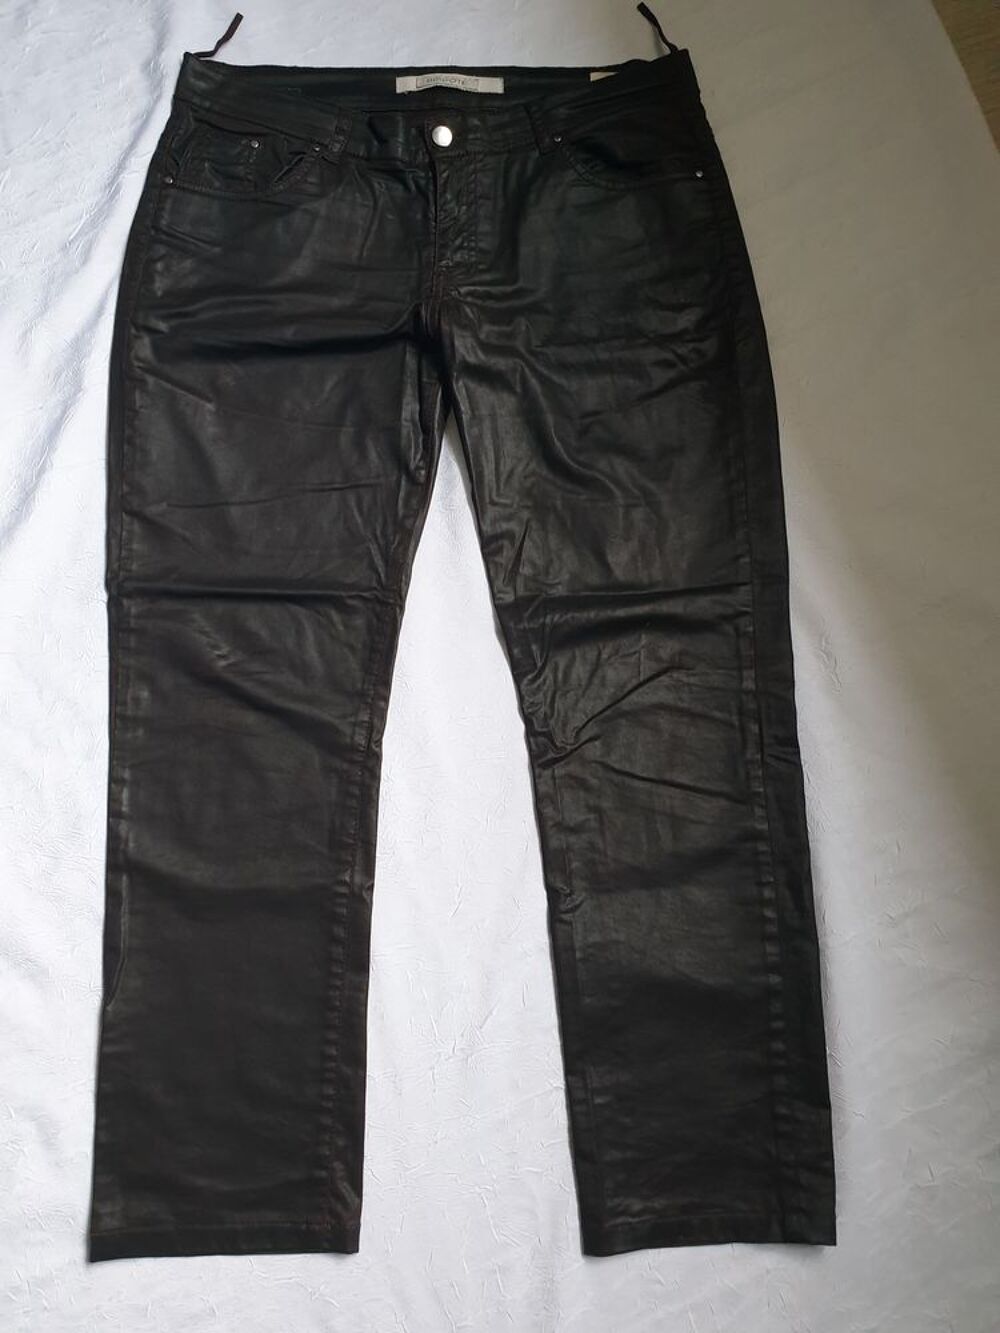 3 Pantalons effet glac&eacute; Biscote taille 42 Vtements